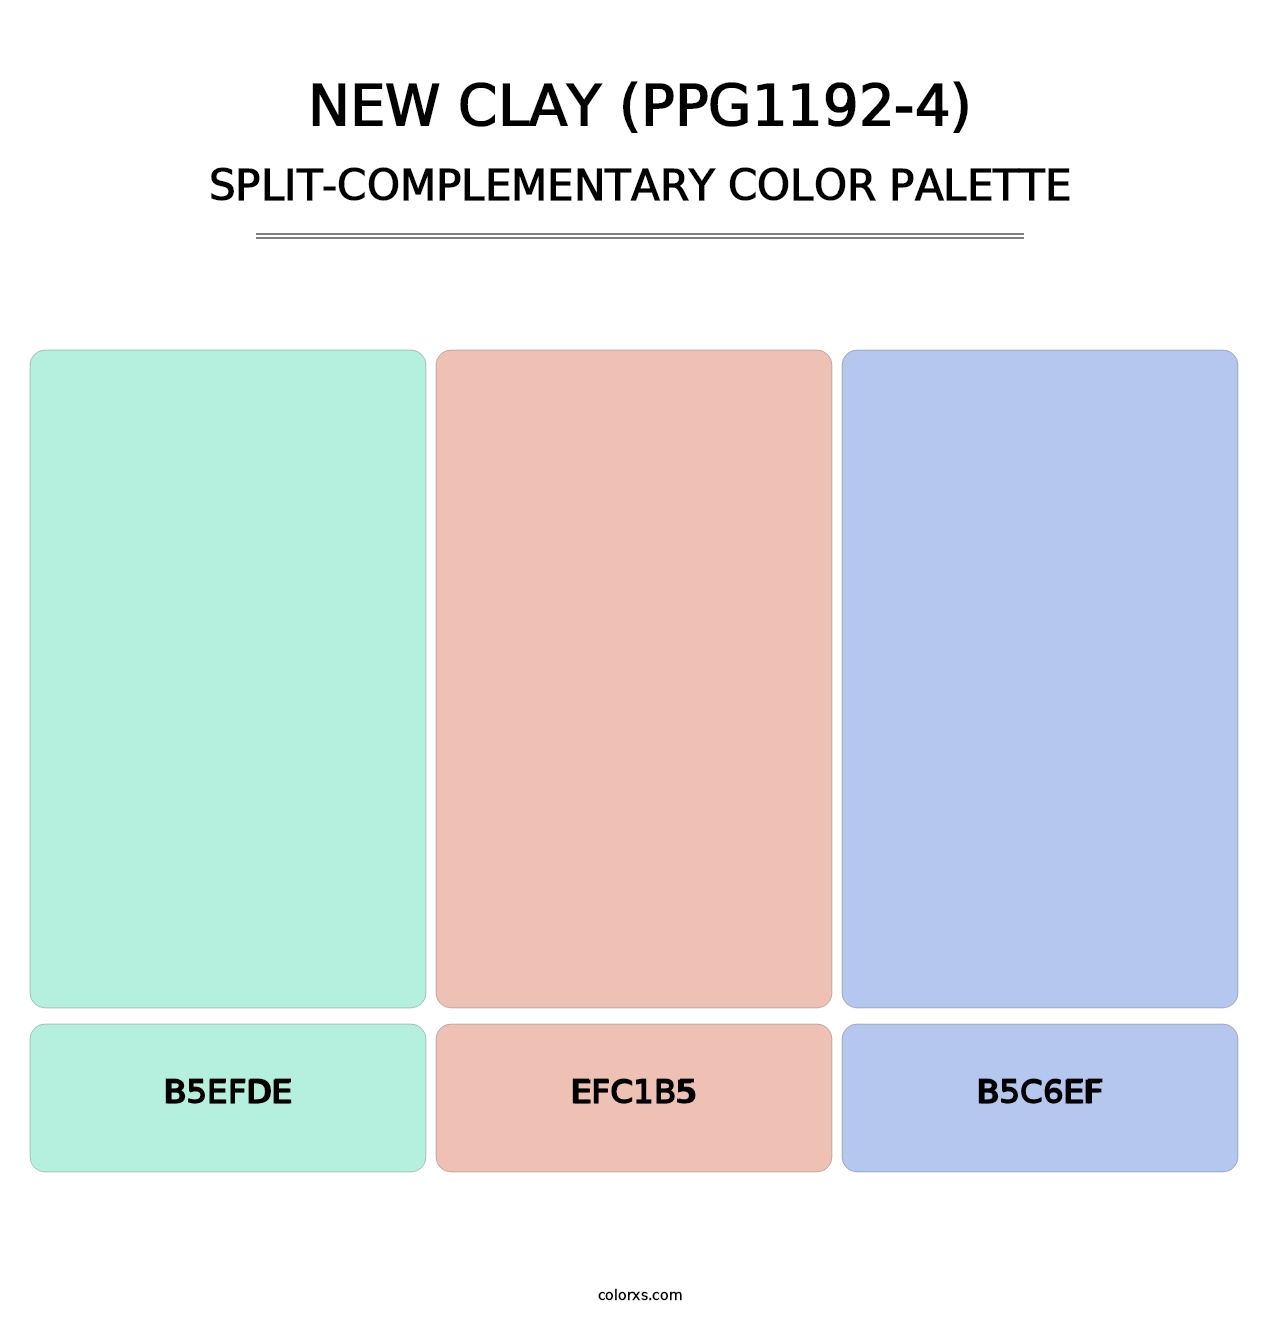 New Clay (PPG1192-4) - Split-Complementary Color Palette